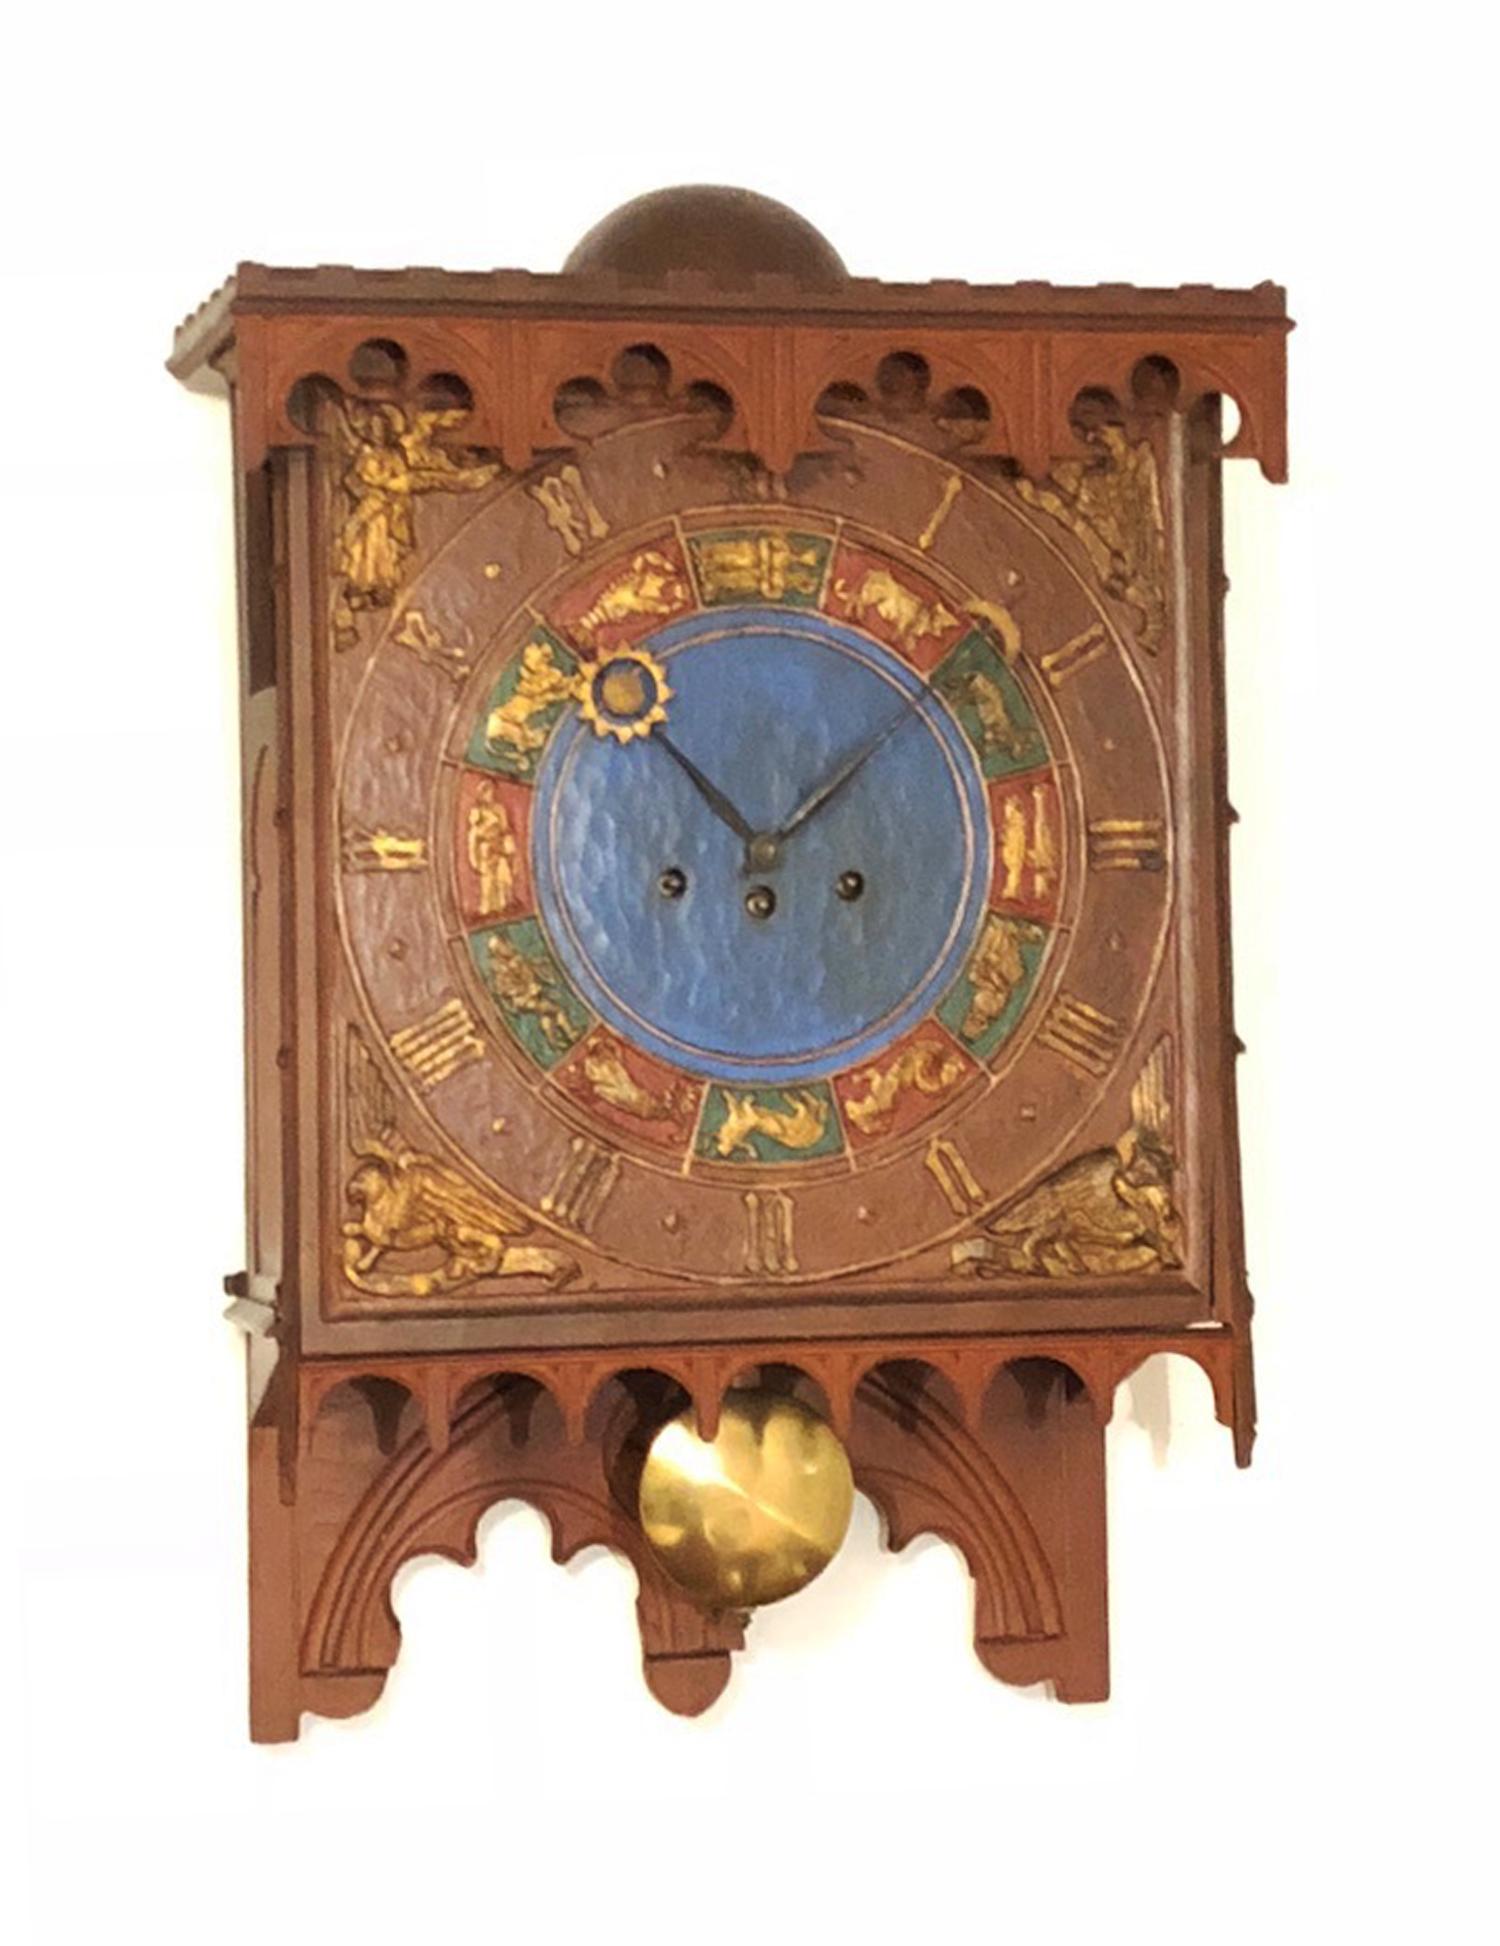 Wooden painted box with Gothic style carvings, clock face with carvings in the form of a zodiac sign, supplied pendulum and wrench.
Movement with musical mechanism. Manufactured circa 1890 in Denmark.
Wood in original condition, movement after